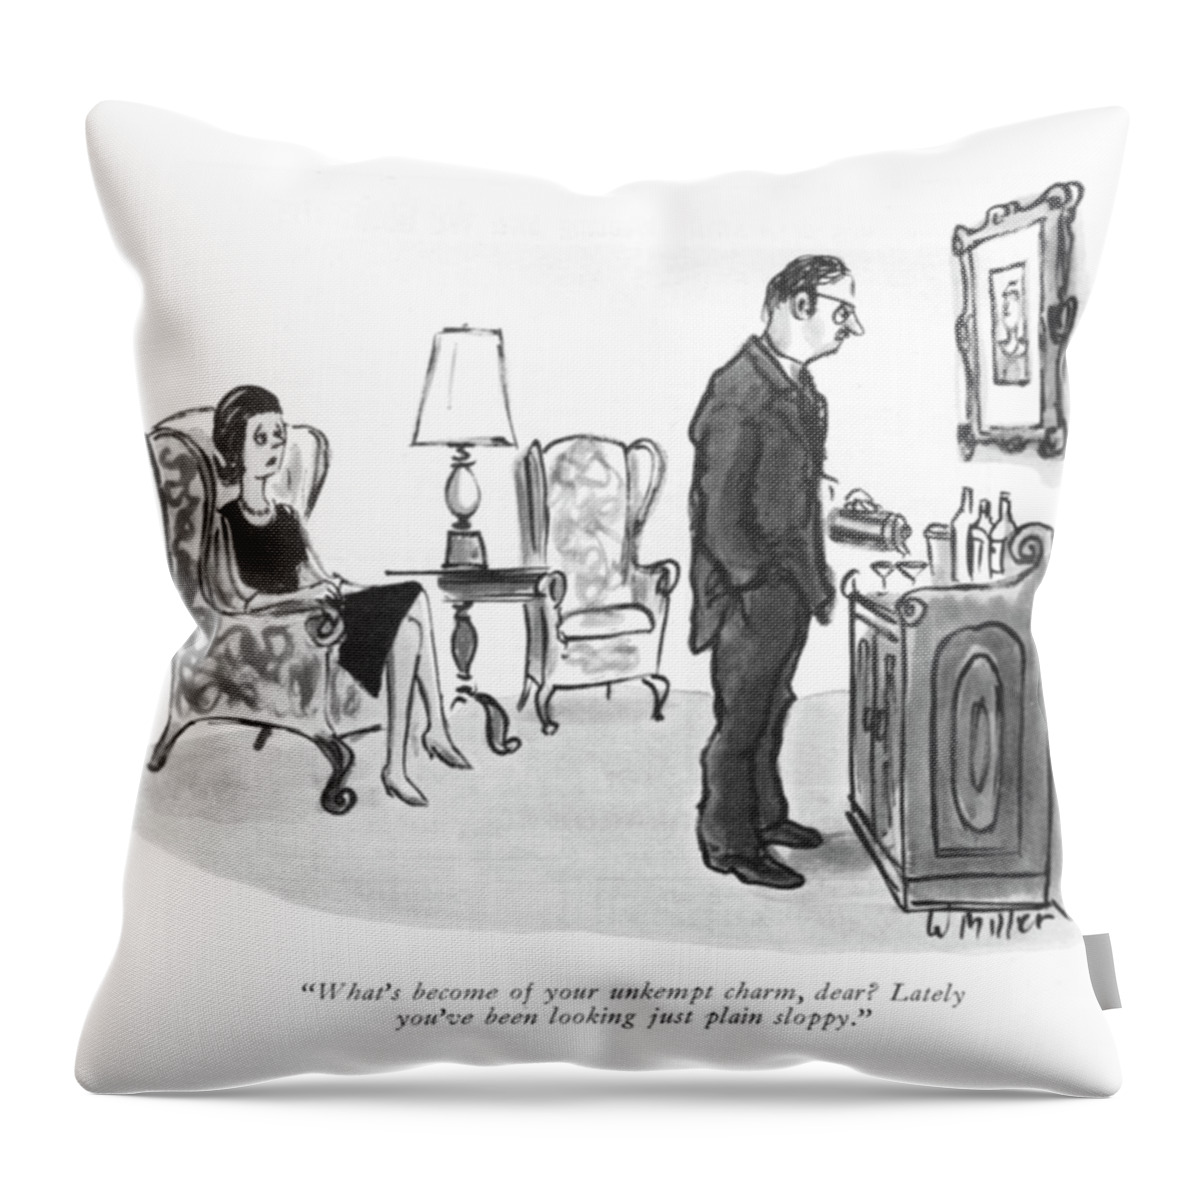 Your Unkempt Charm Throw Pillow